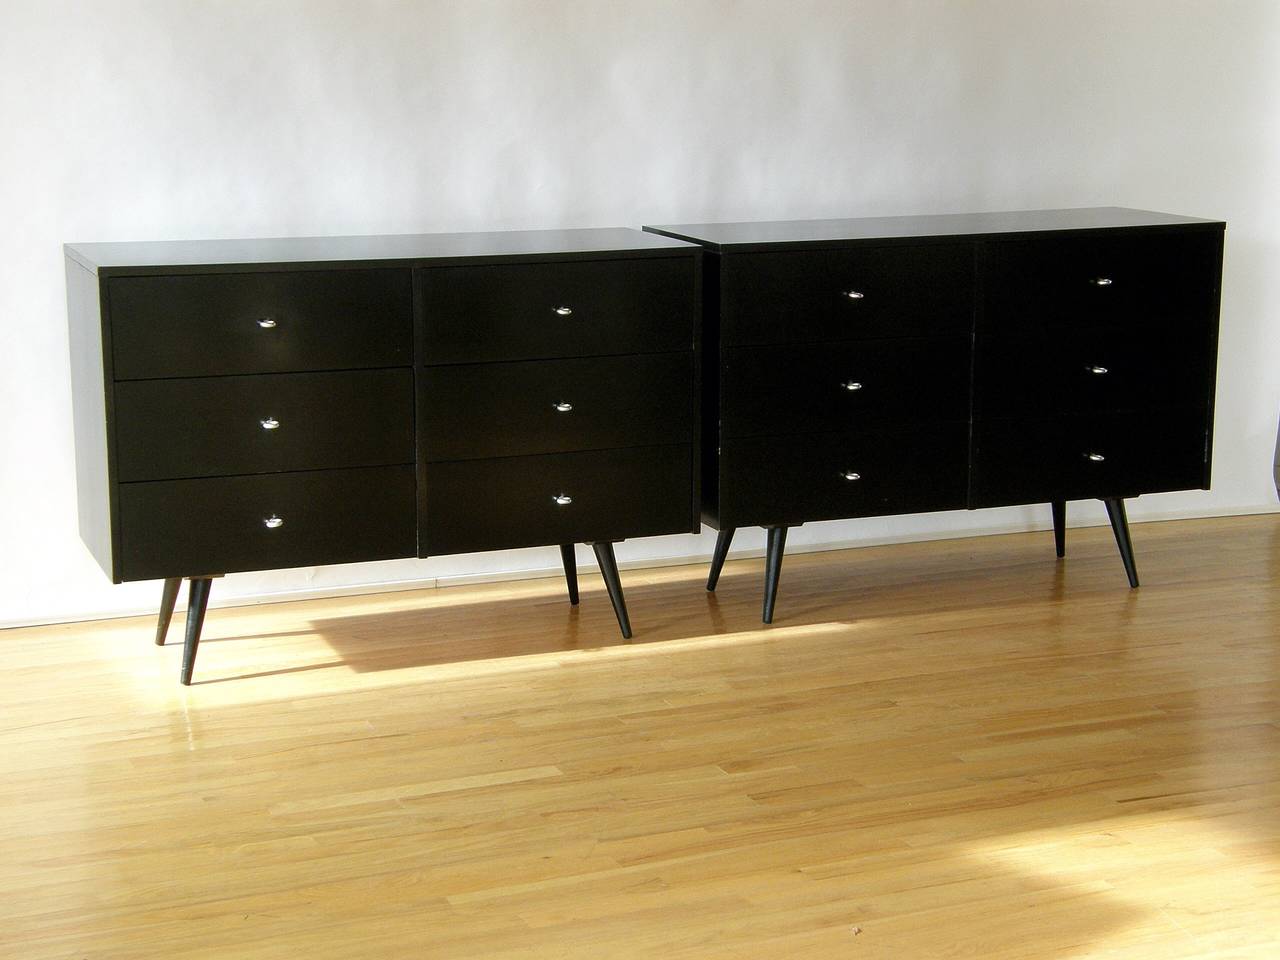 Pair of six drawer Paul McCobb dressers with a black painted finish and aluminum ring pulls.

Please use Contact Dealer button if you have any questions.